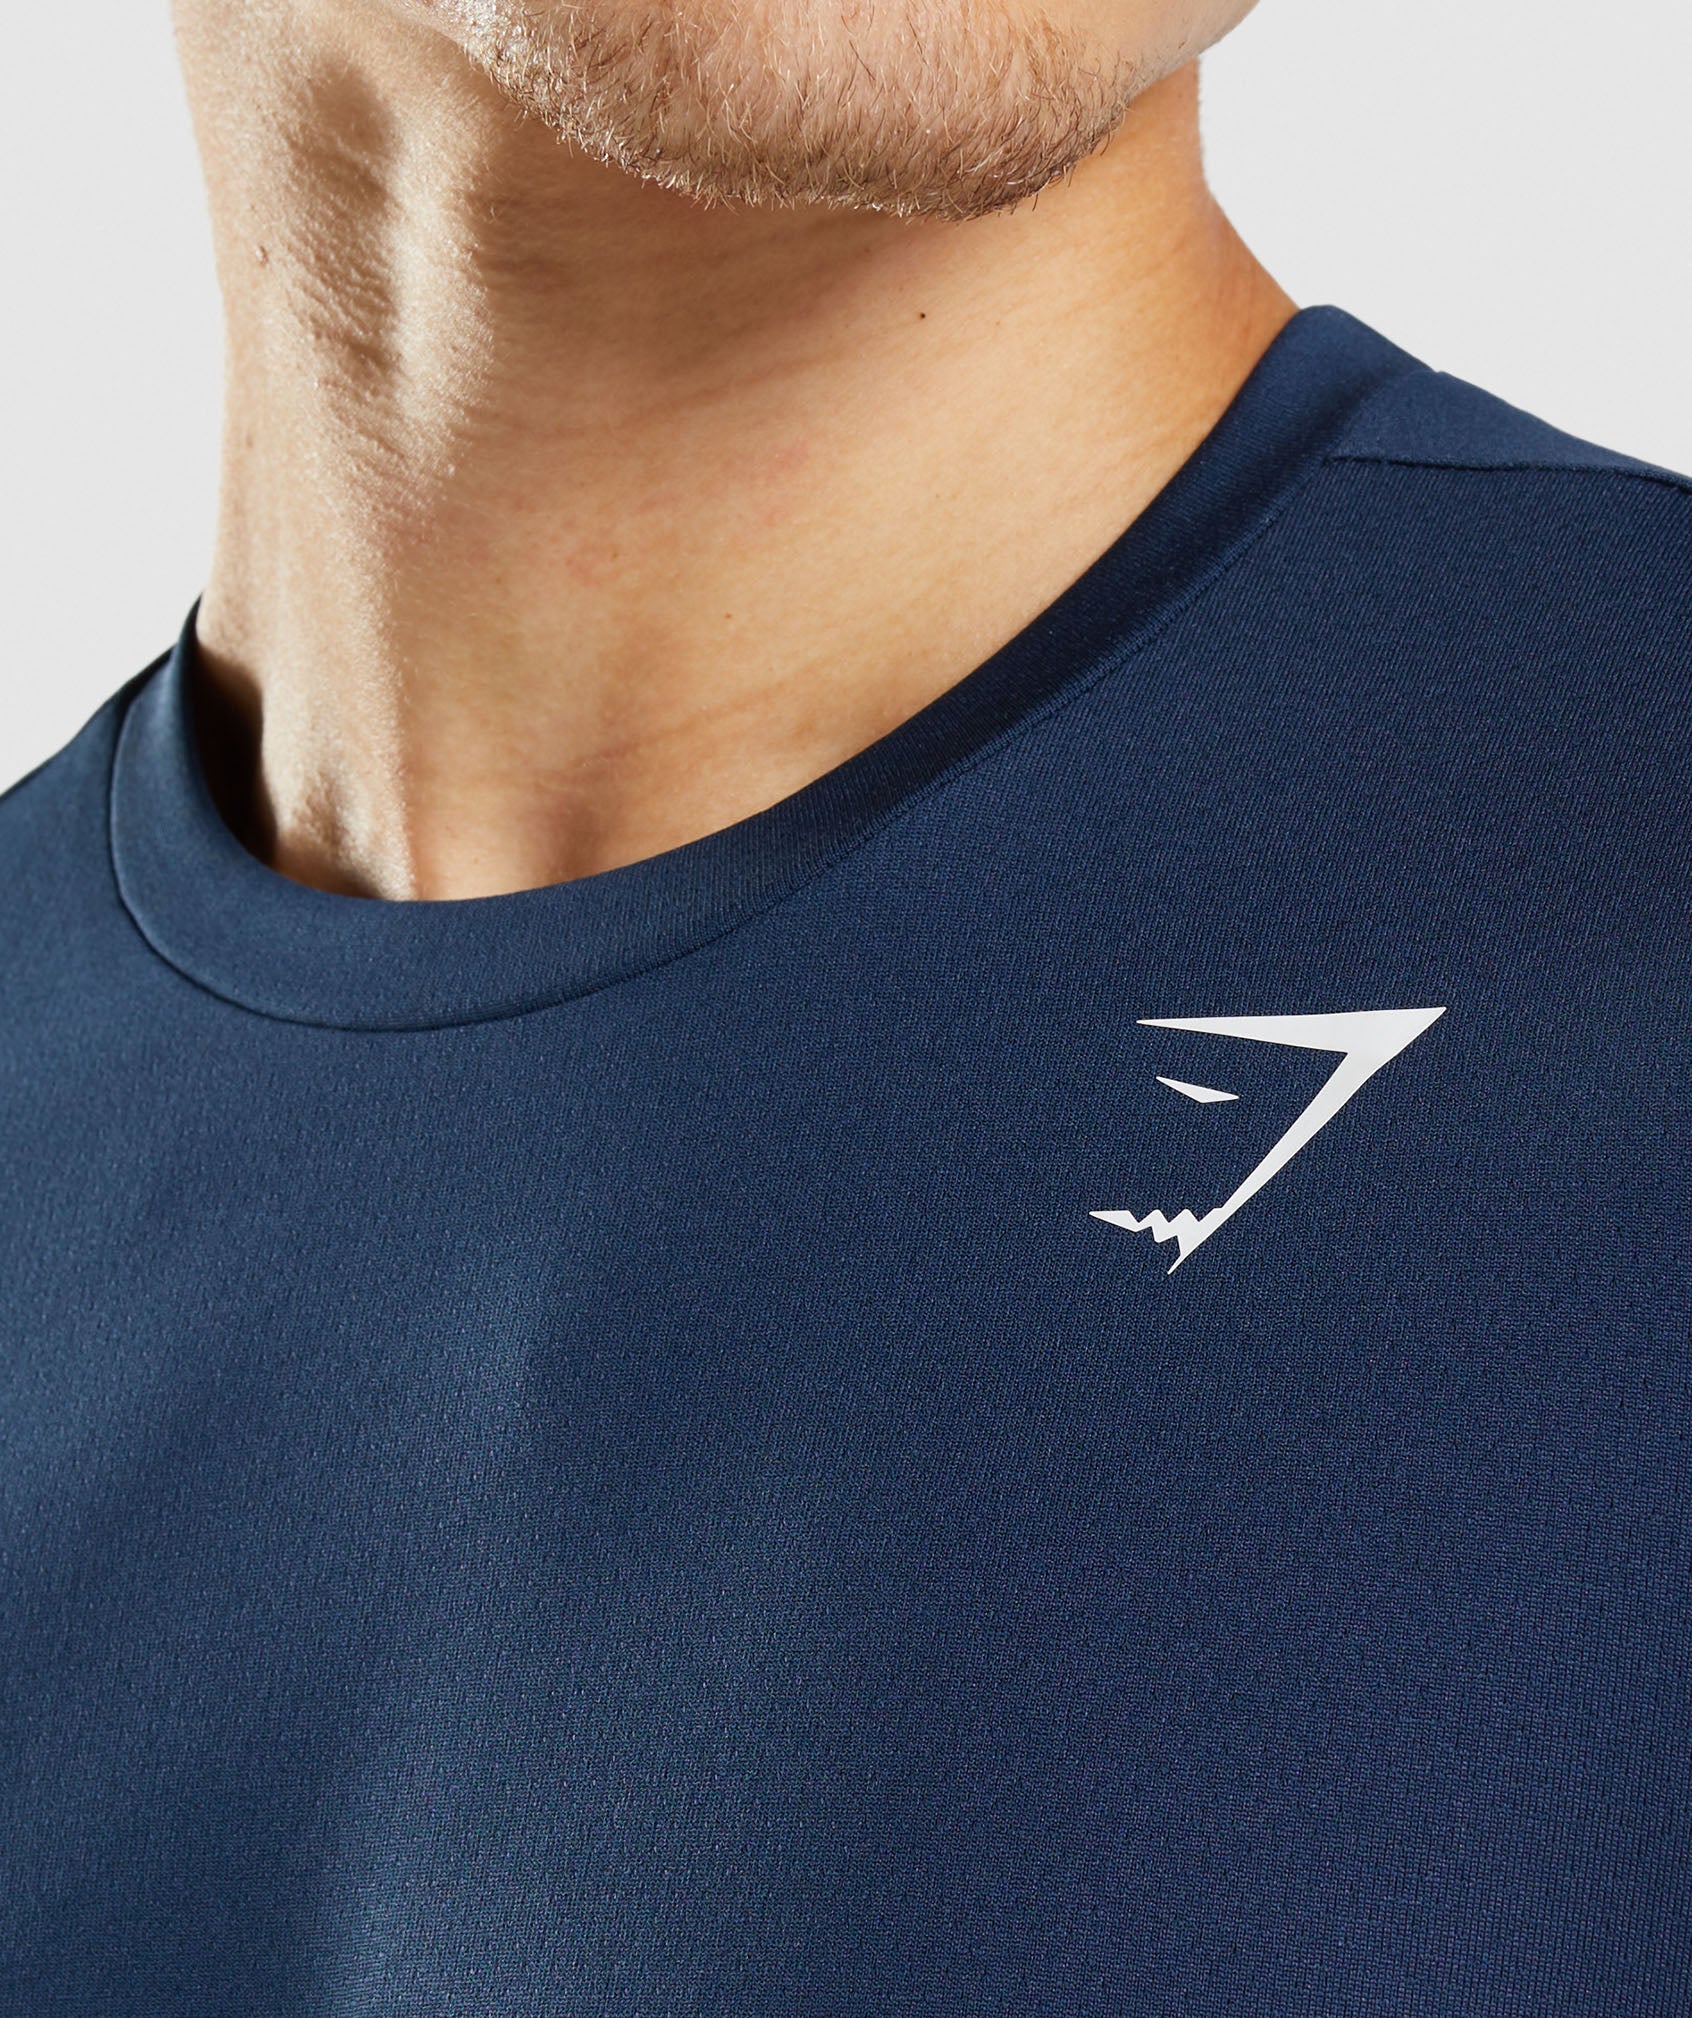 Arrival T-Shirt in Navy